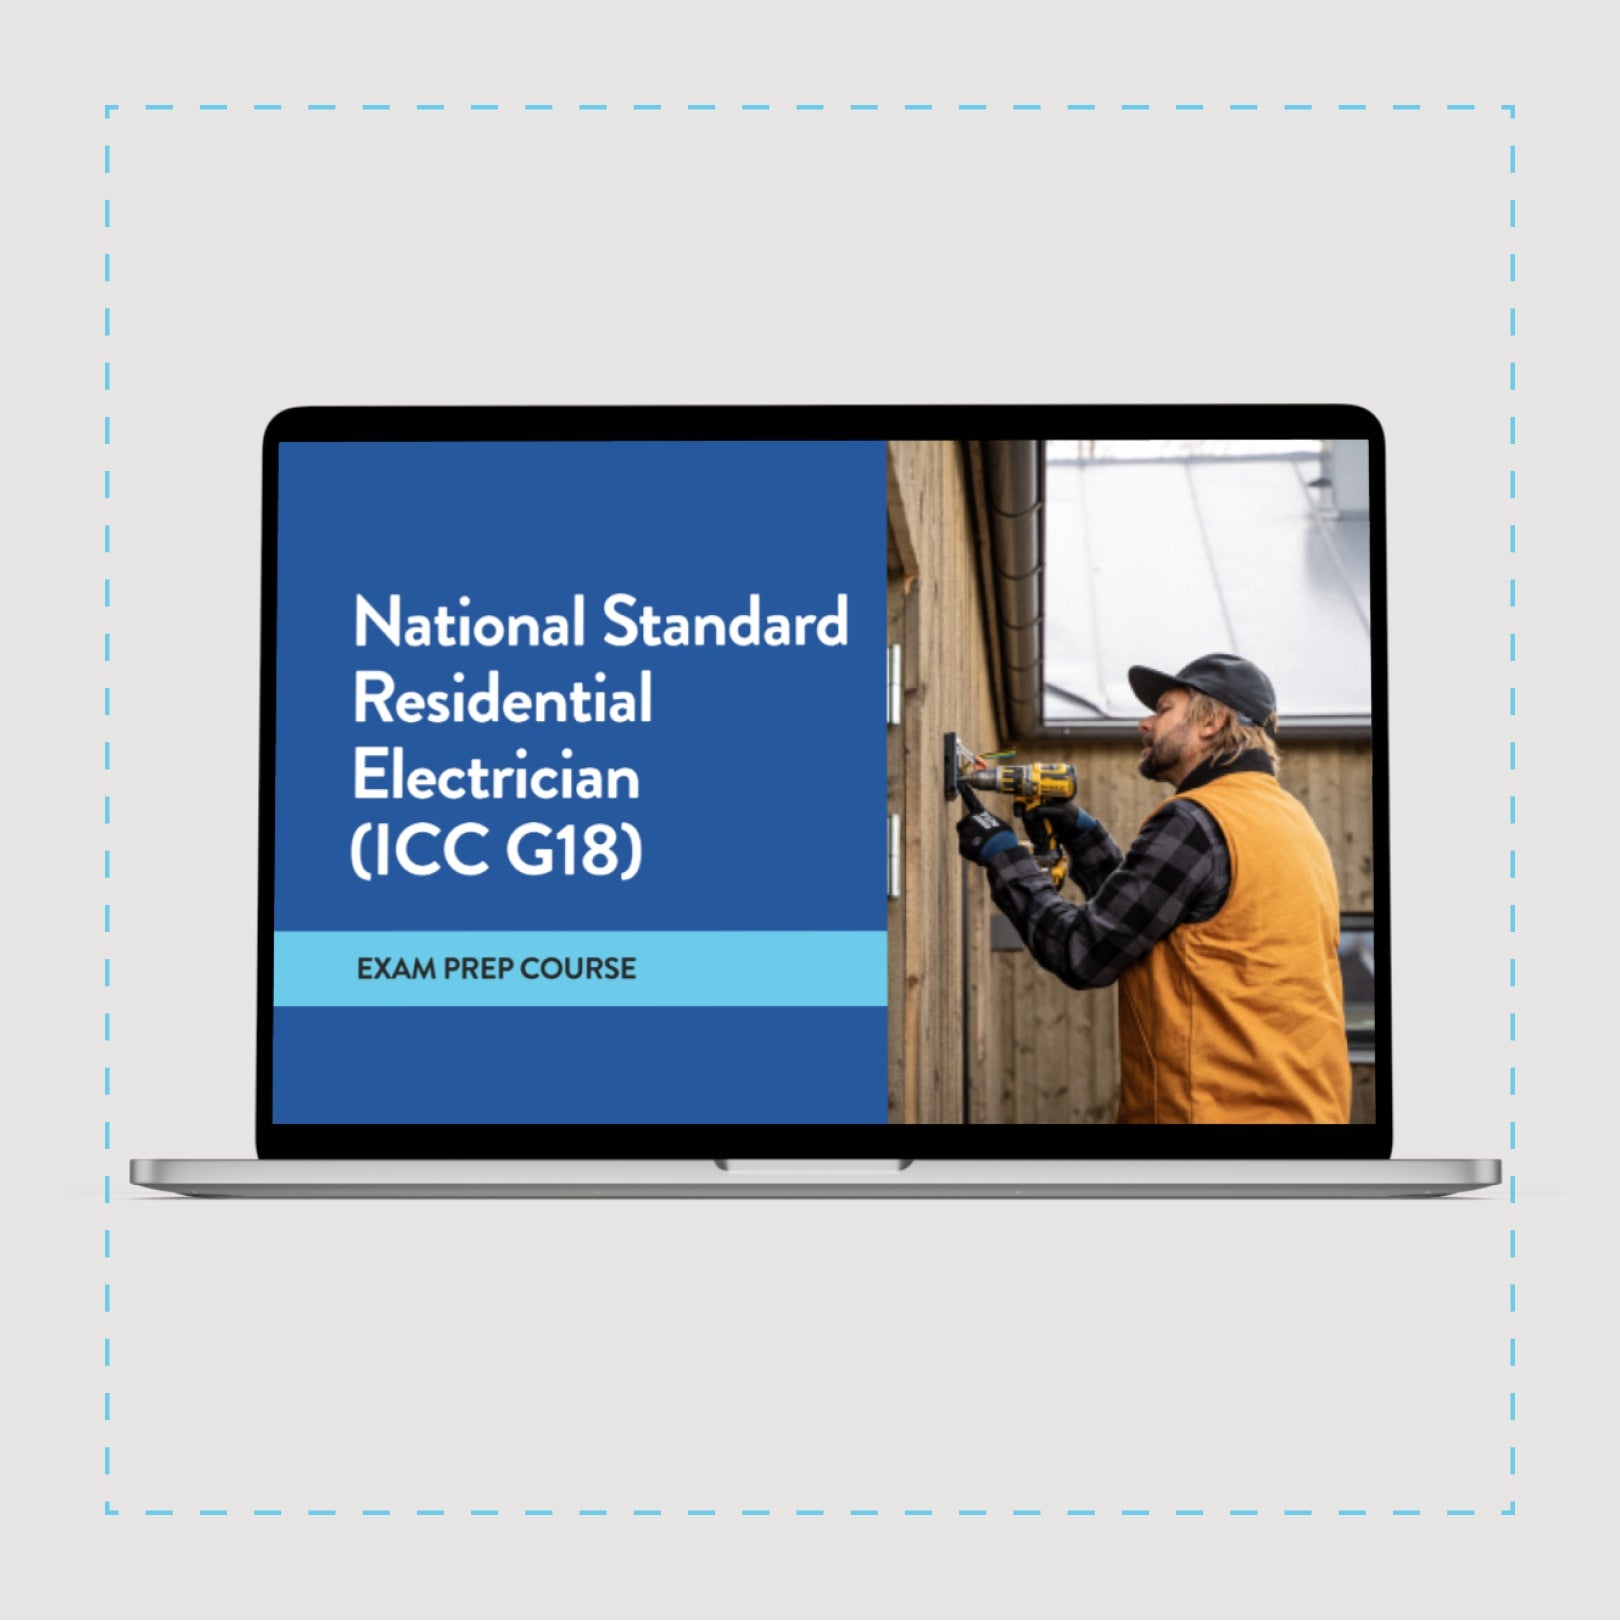 National Standard Residential Electrician (ICC G18) Exam Prep Course